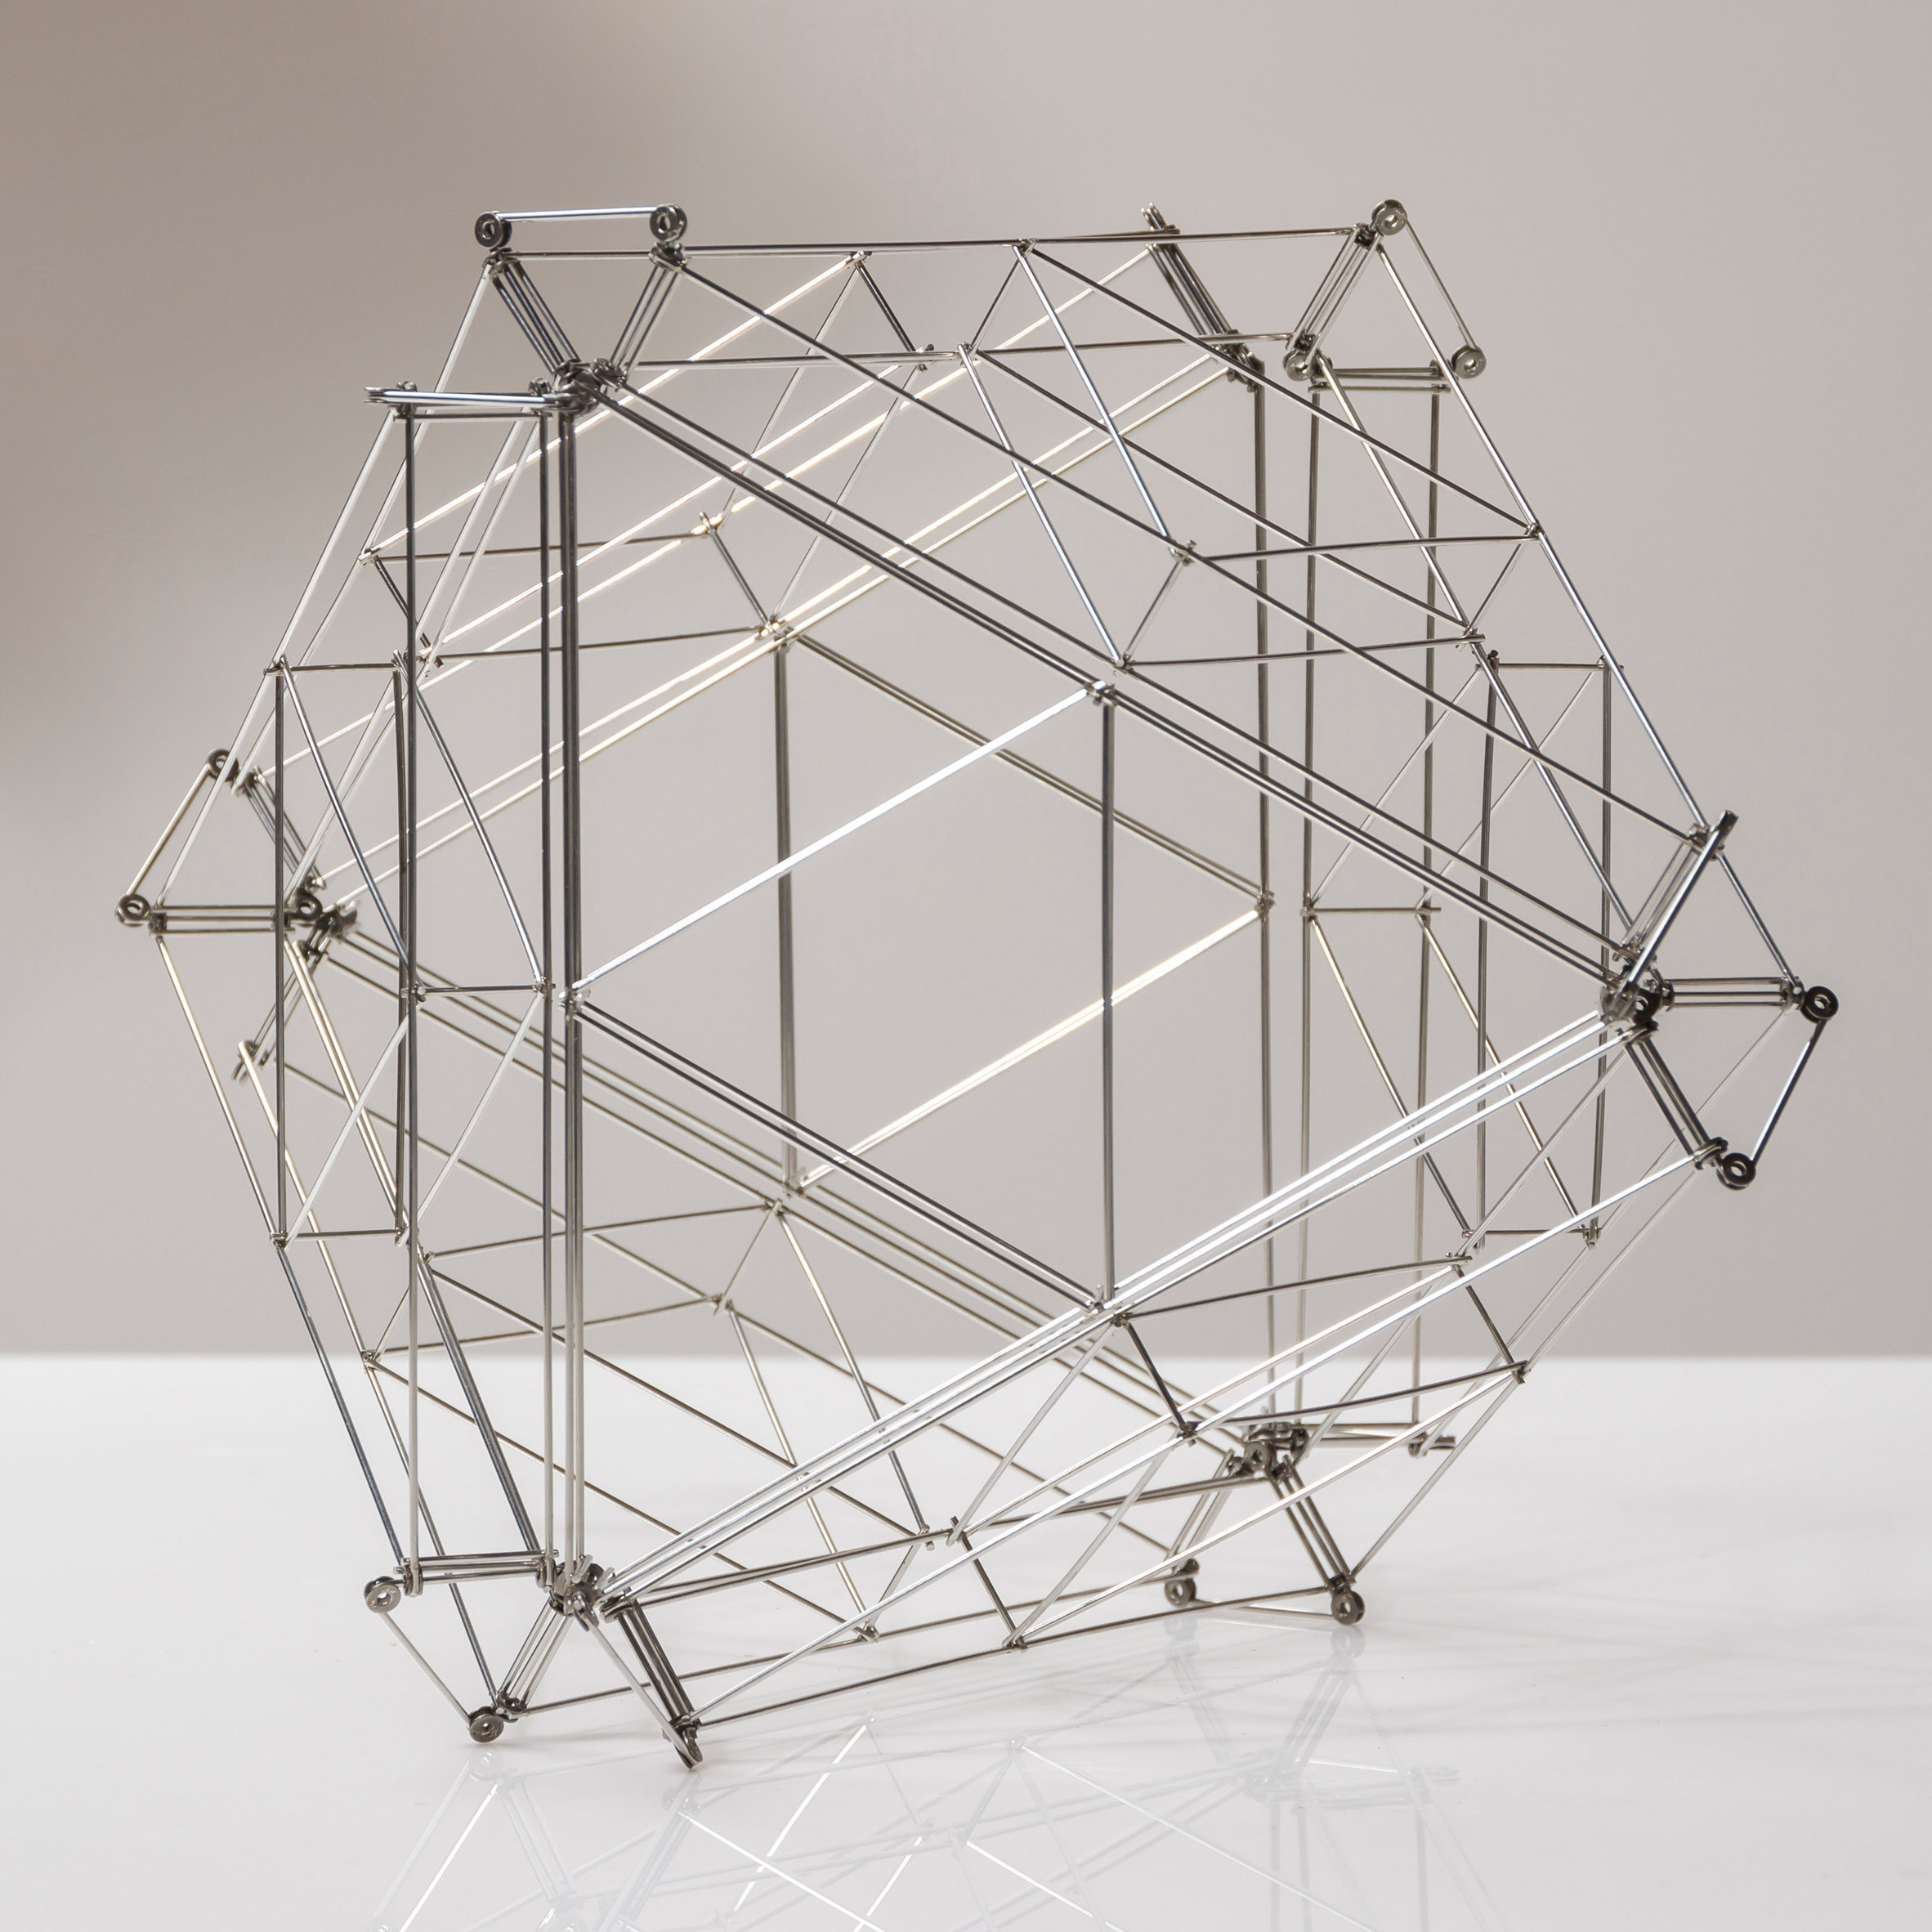 Richard Buckminster Fuller, Inventions and Models exhibition at Edward Cella Art + Architecture